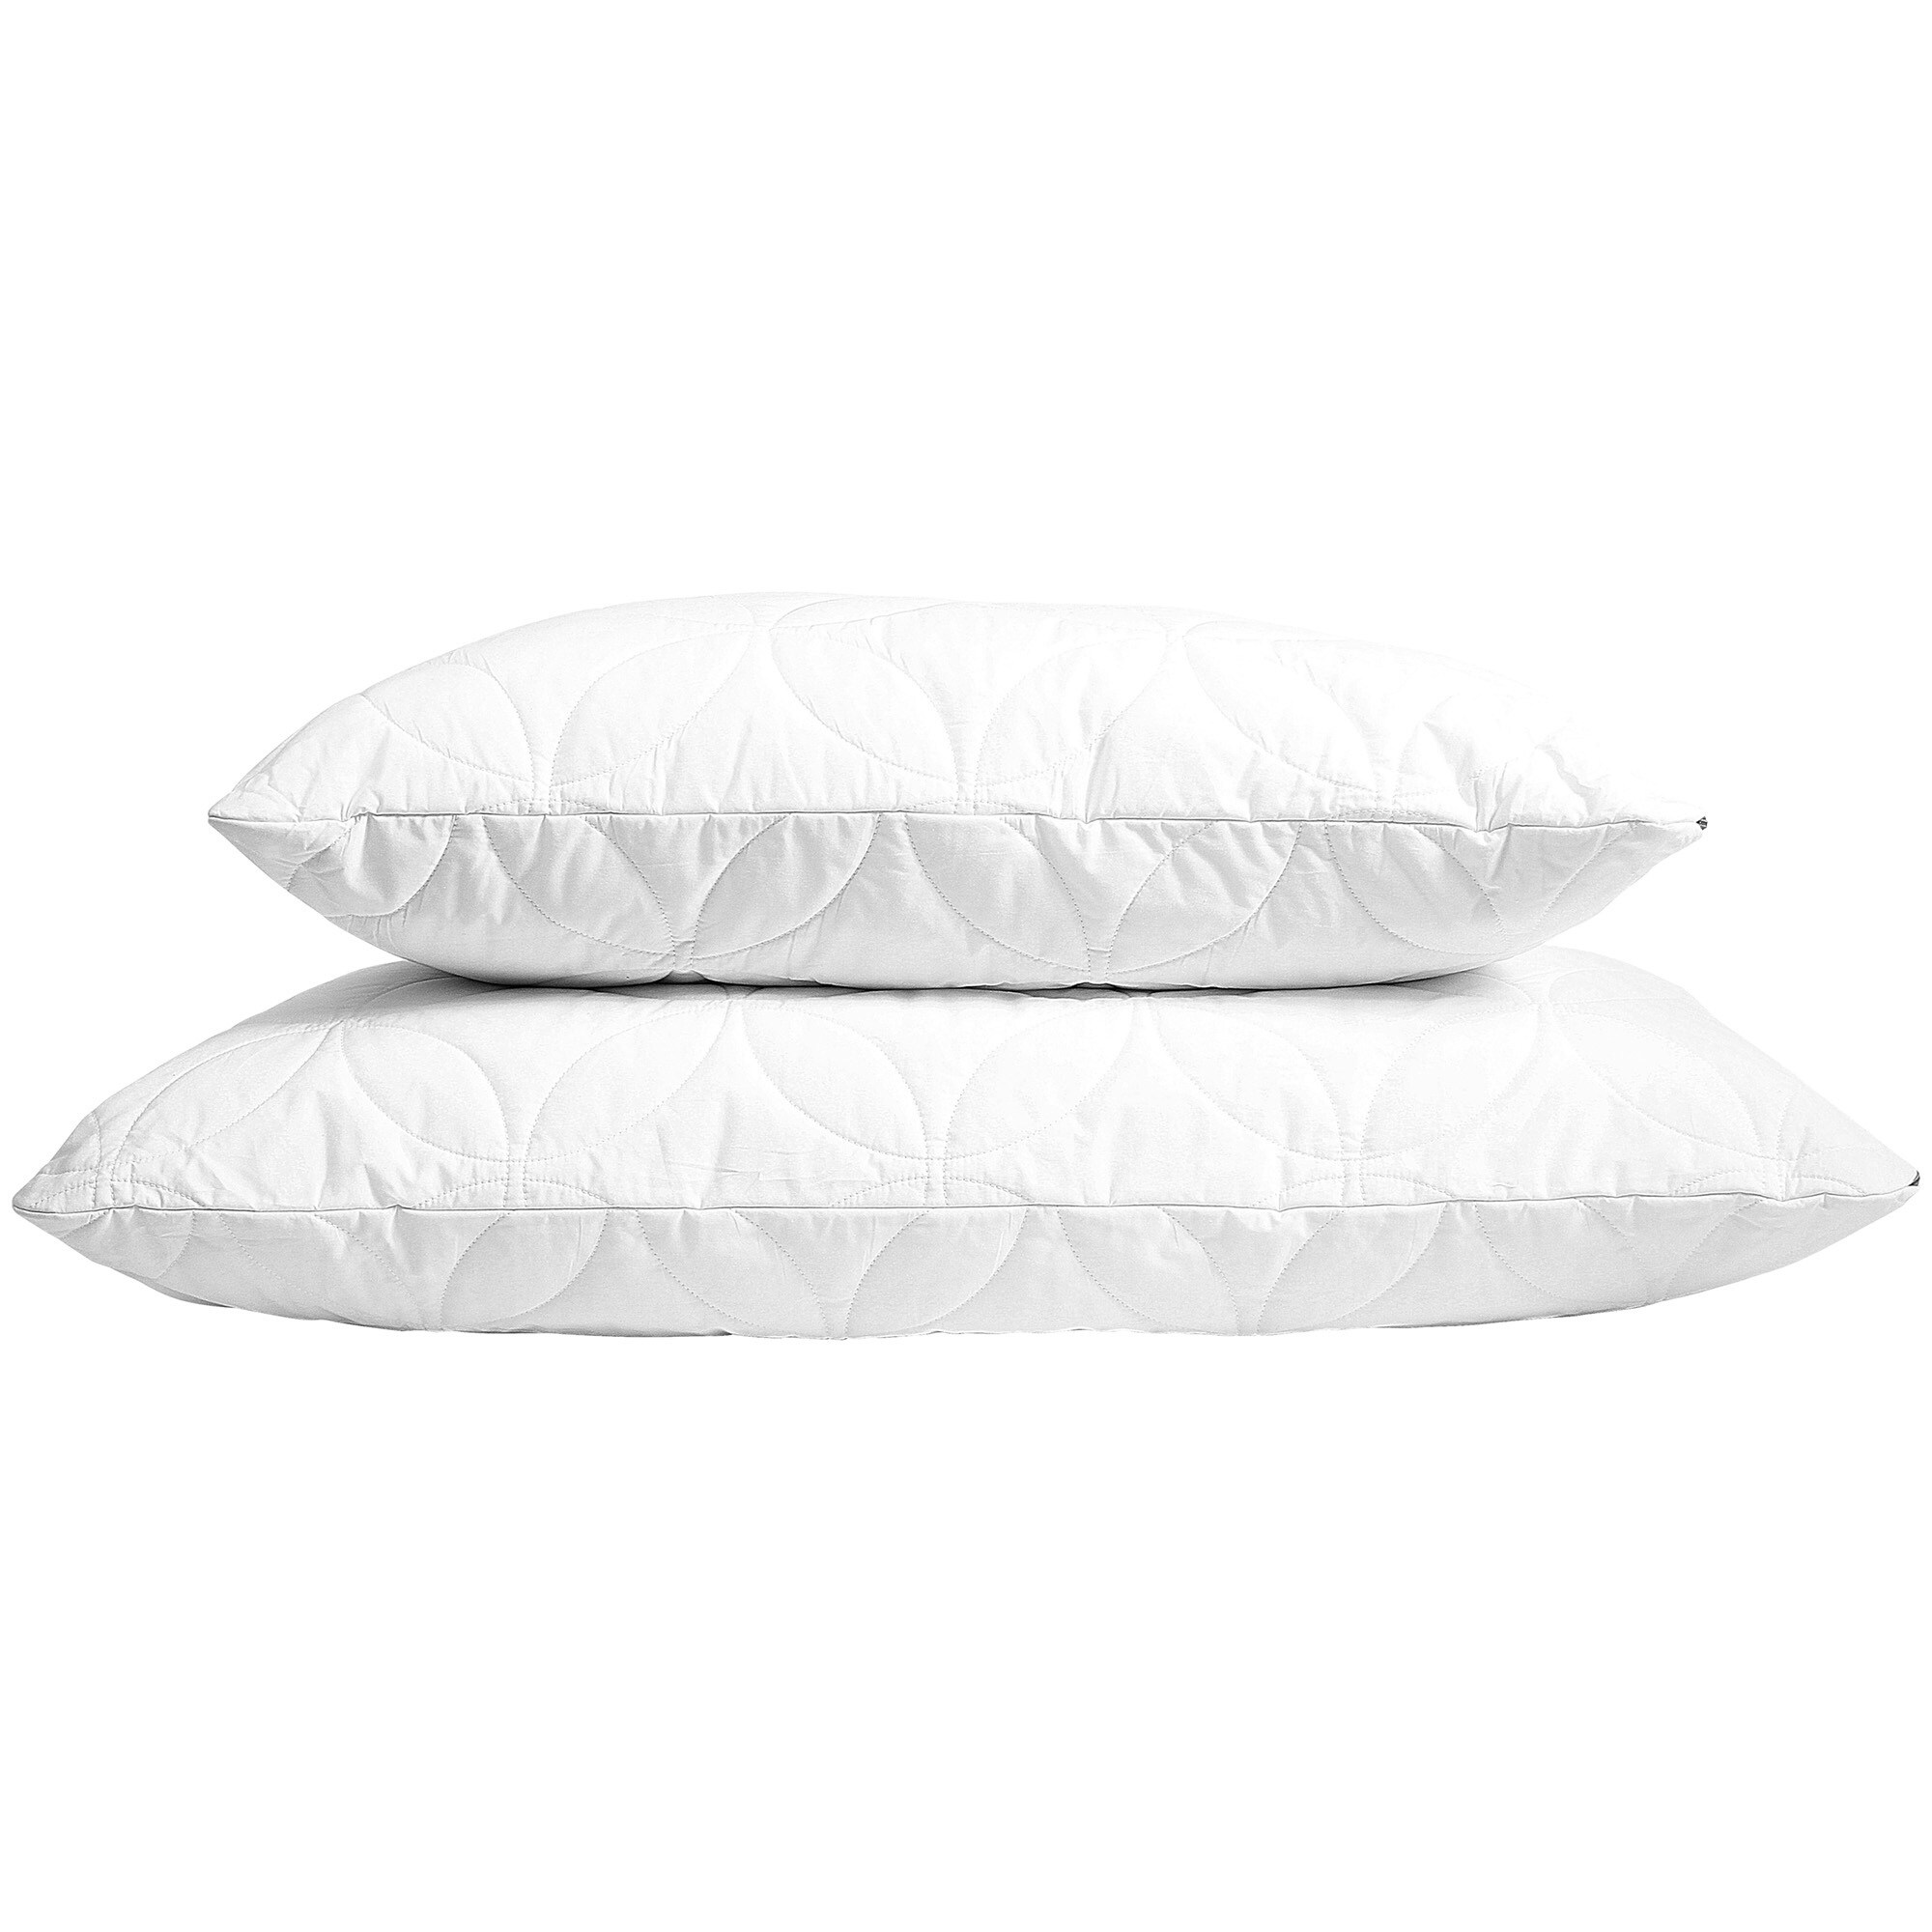 The Comfy Cloud Pillow (***featuring our exclusive ultra-soft ComfyCloud  Technology Fabric)